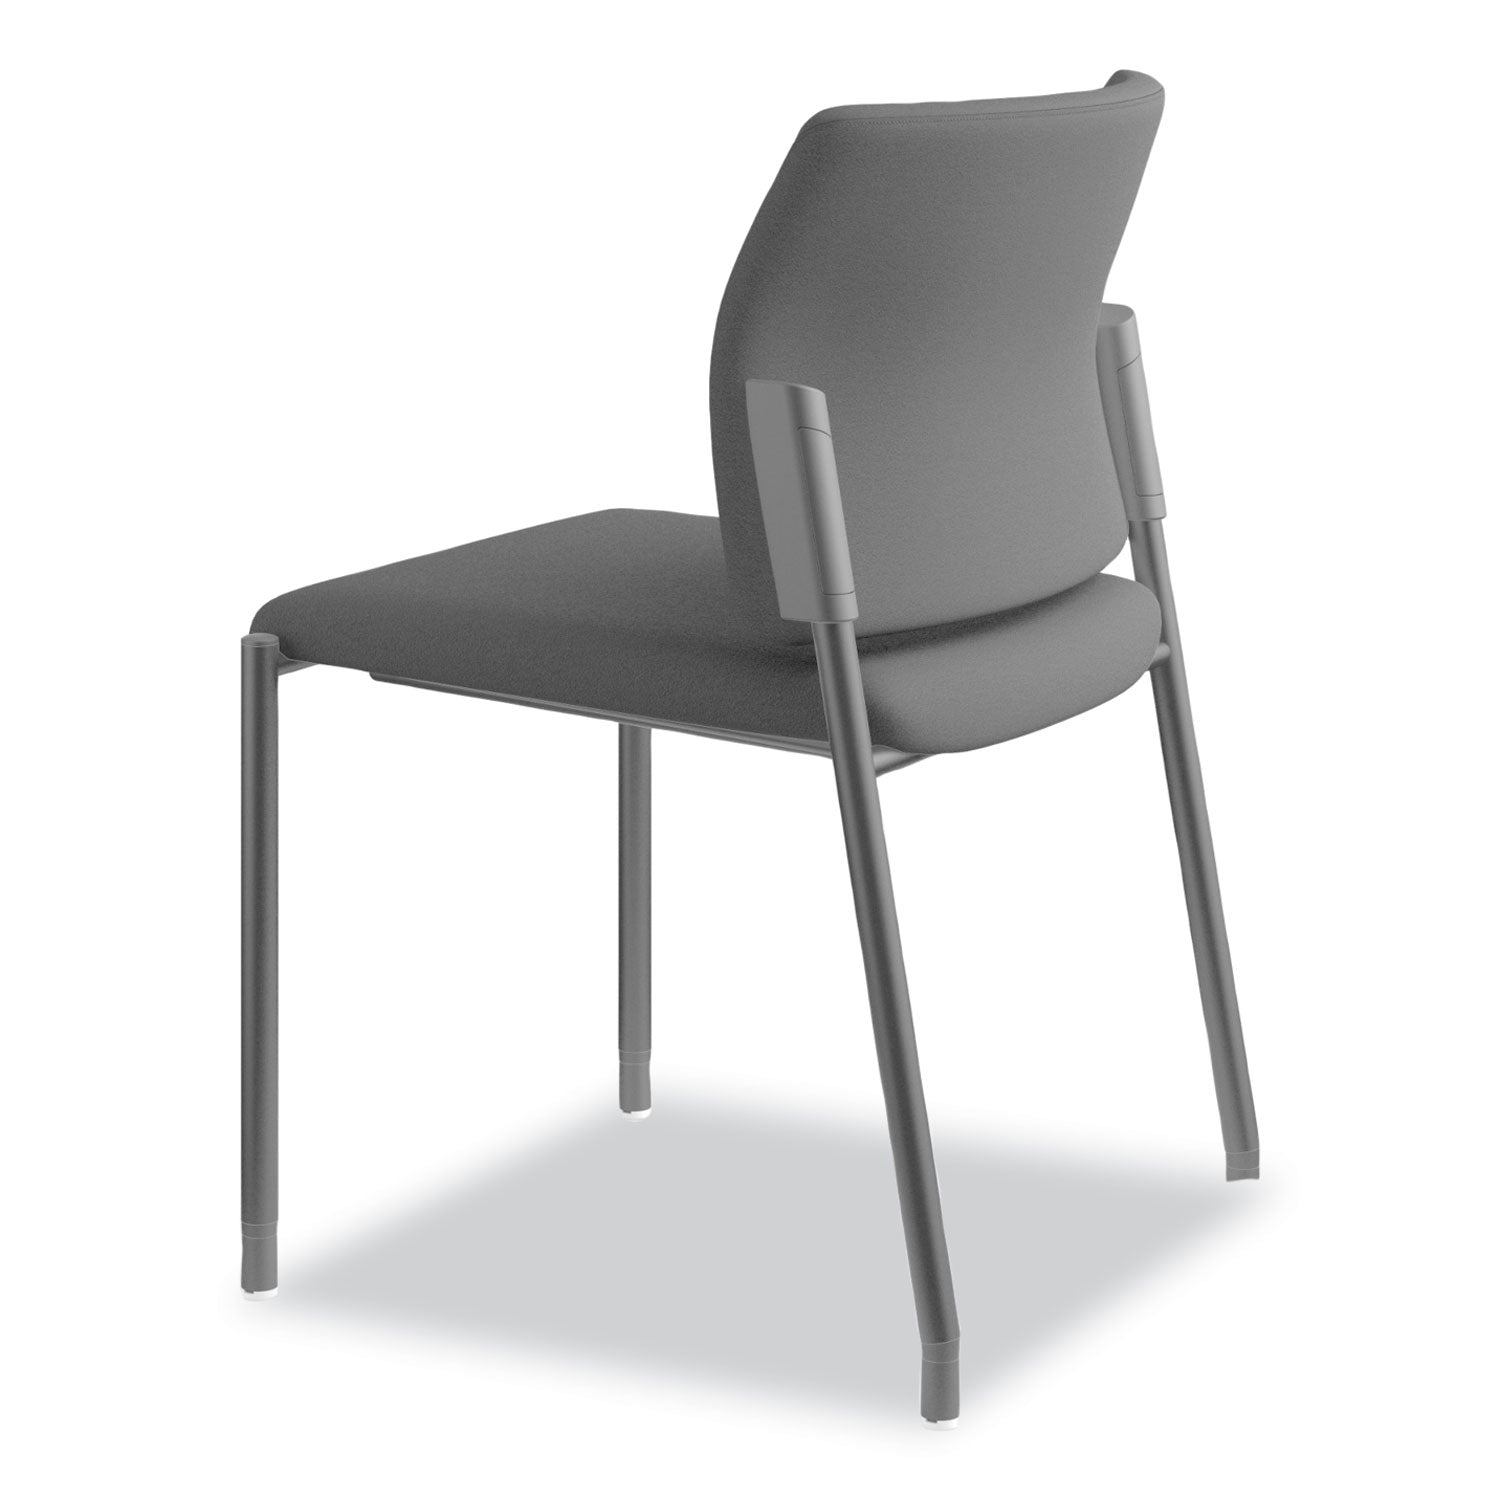 accommodate-series-guest-chair-fabric-upholstery-235-x-2225-x-315-black-seat-back-textured-black-base-2-carton_honsgs6nbcu10ck - 4